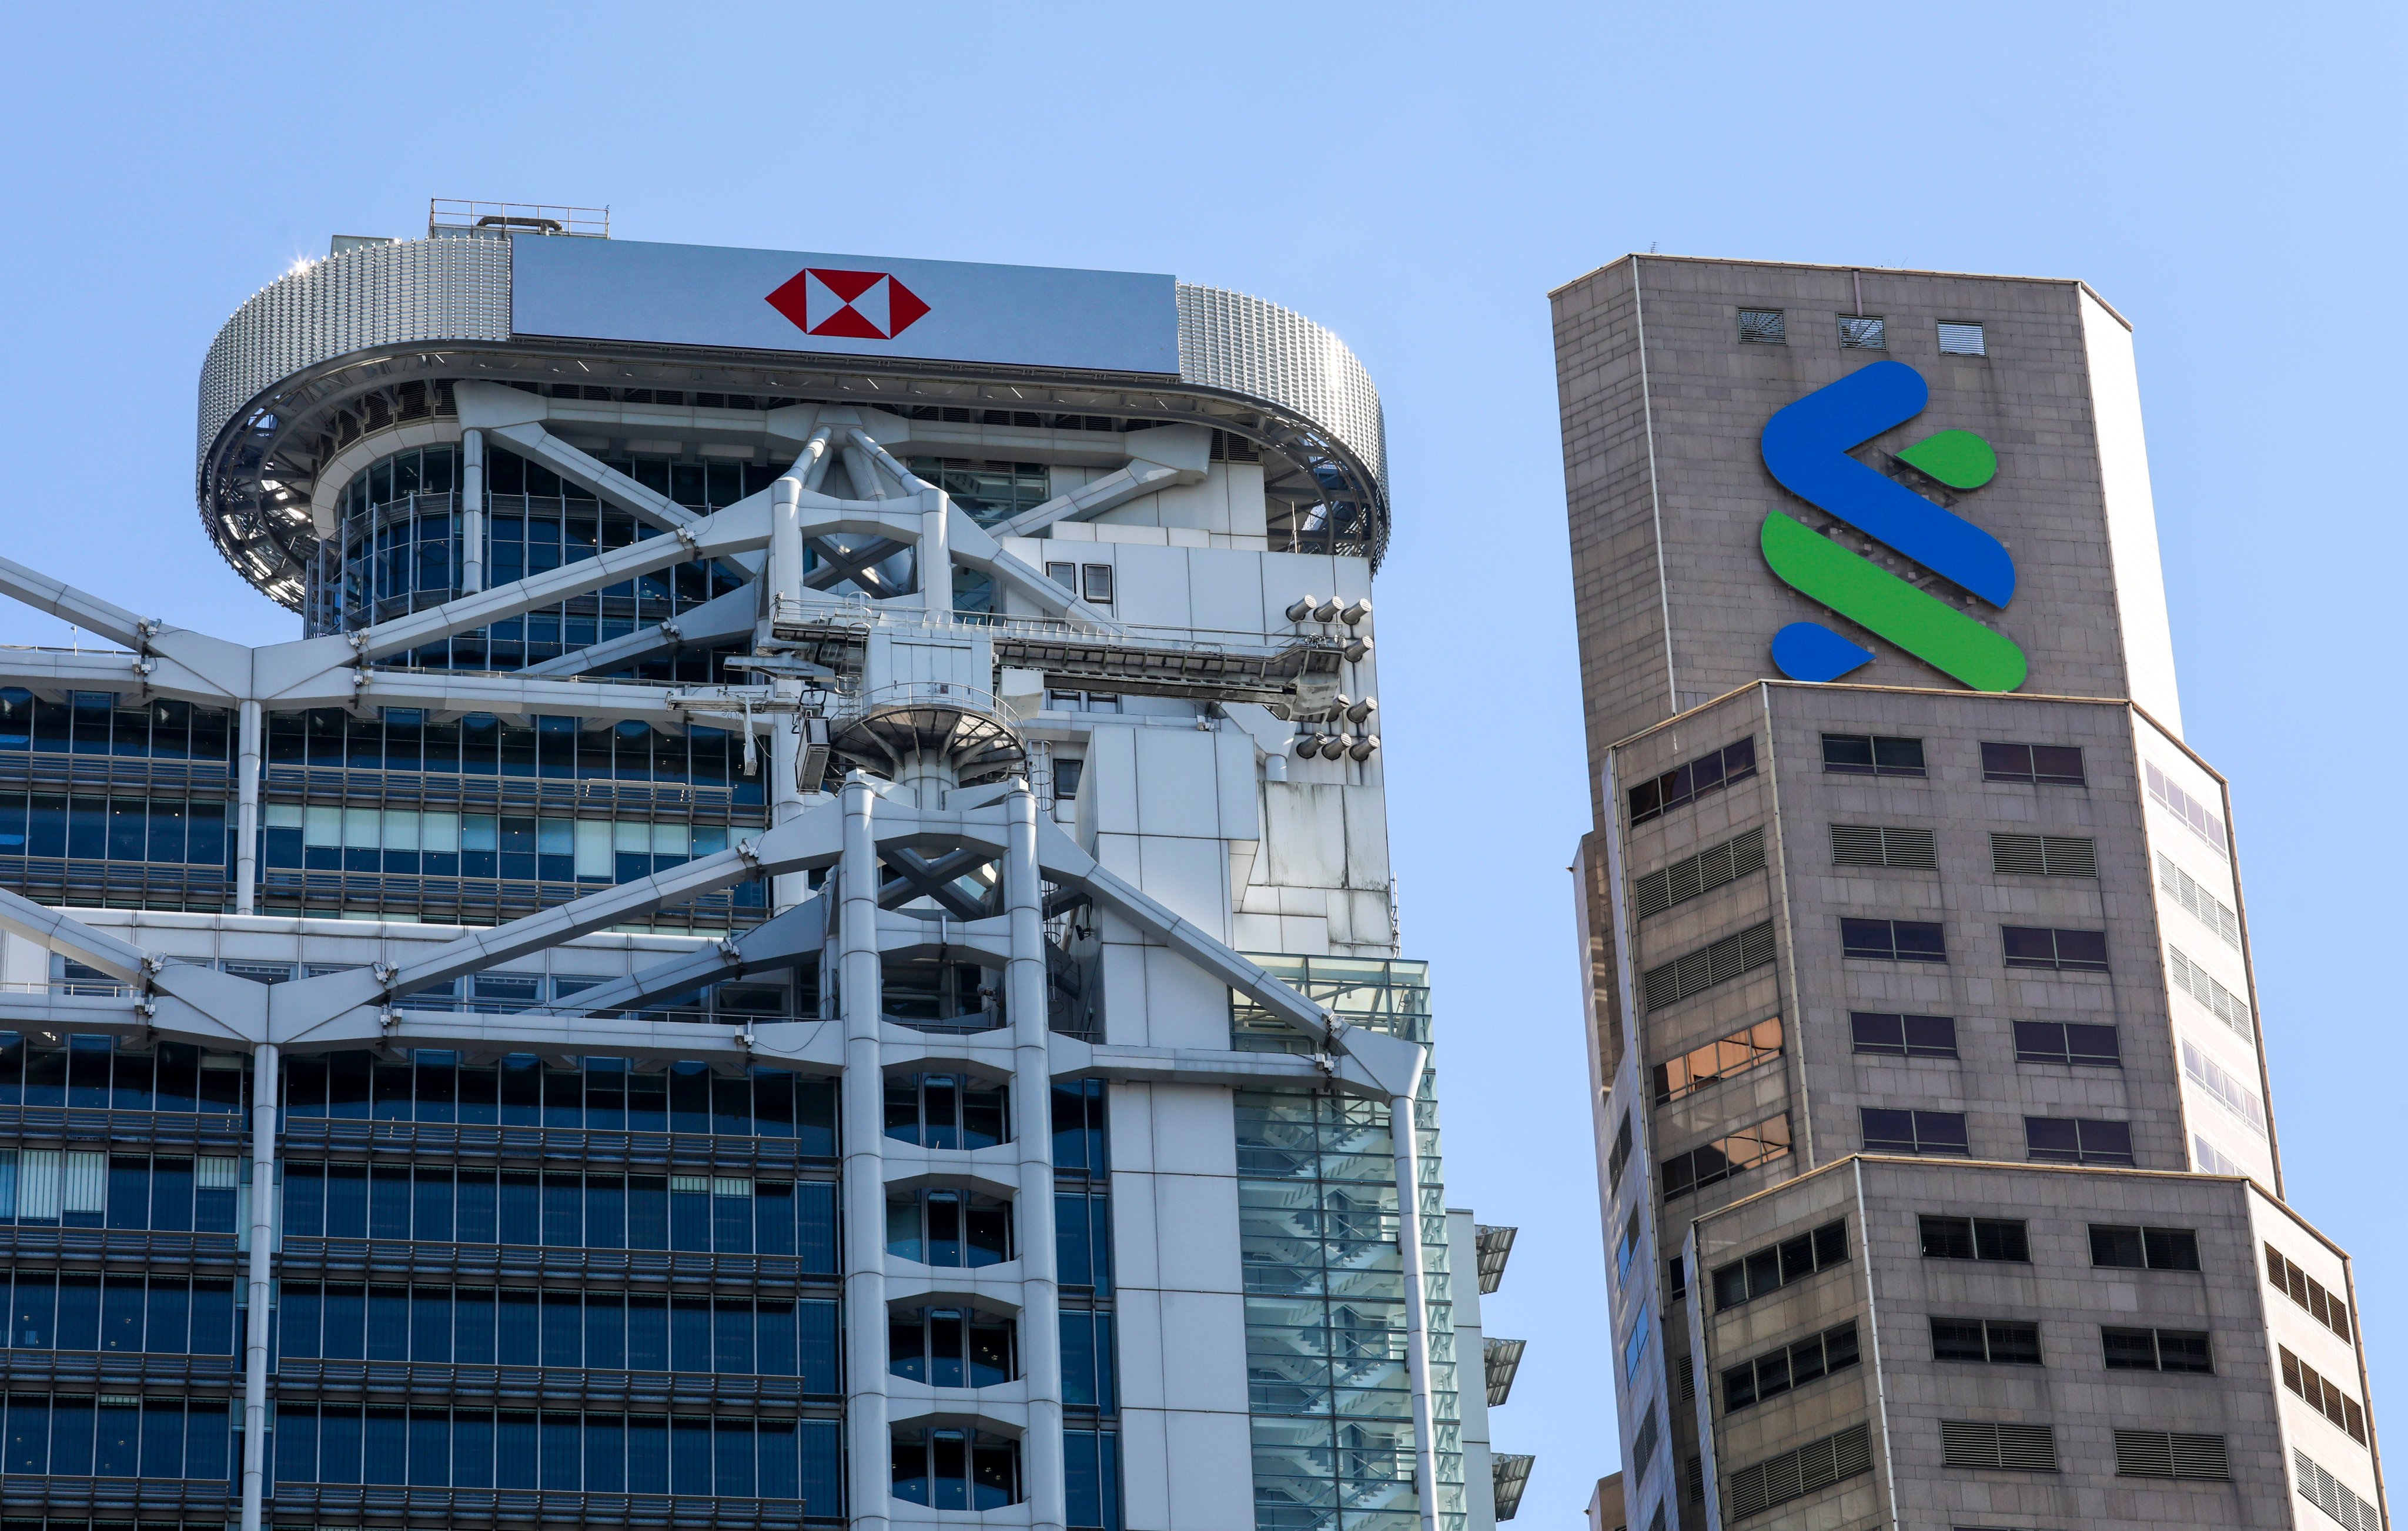 The Headquarters buildings of HSBC and Standard Chartered Bank are photographed at Central. Photo: Yik Yeung -man